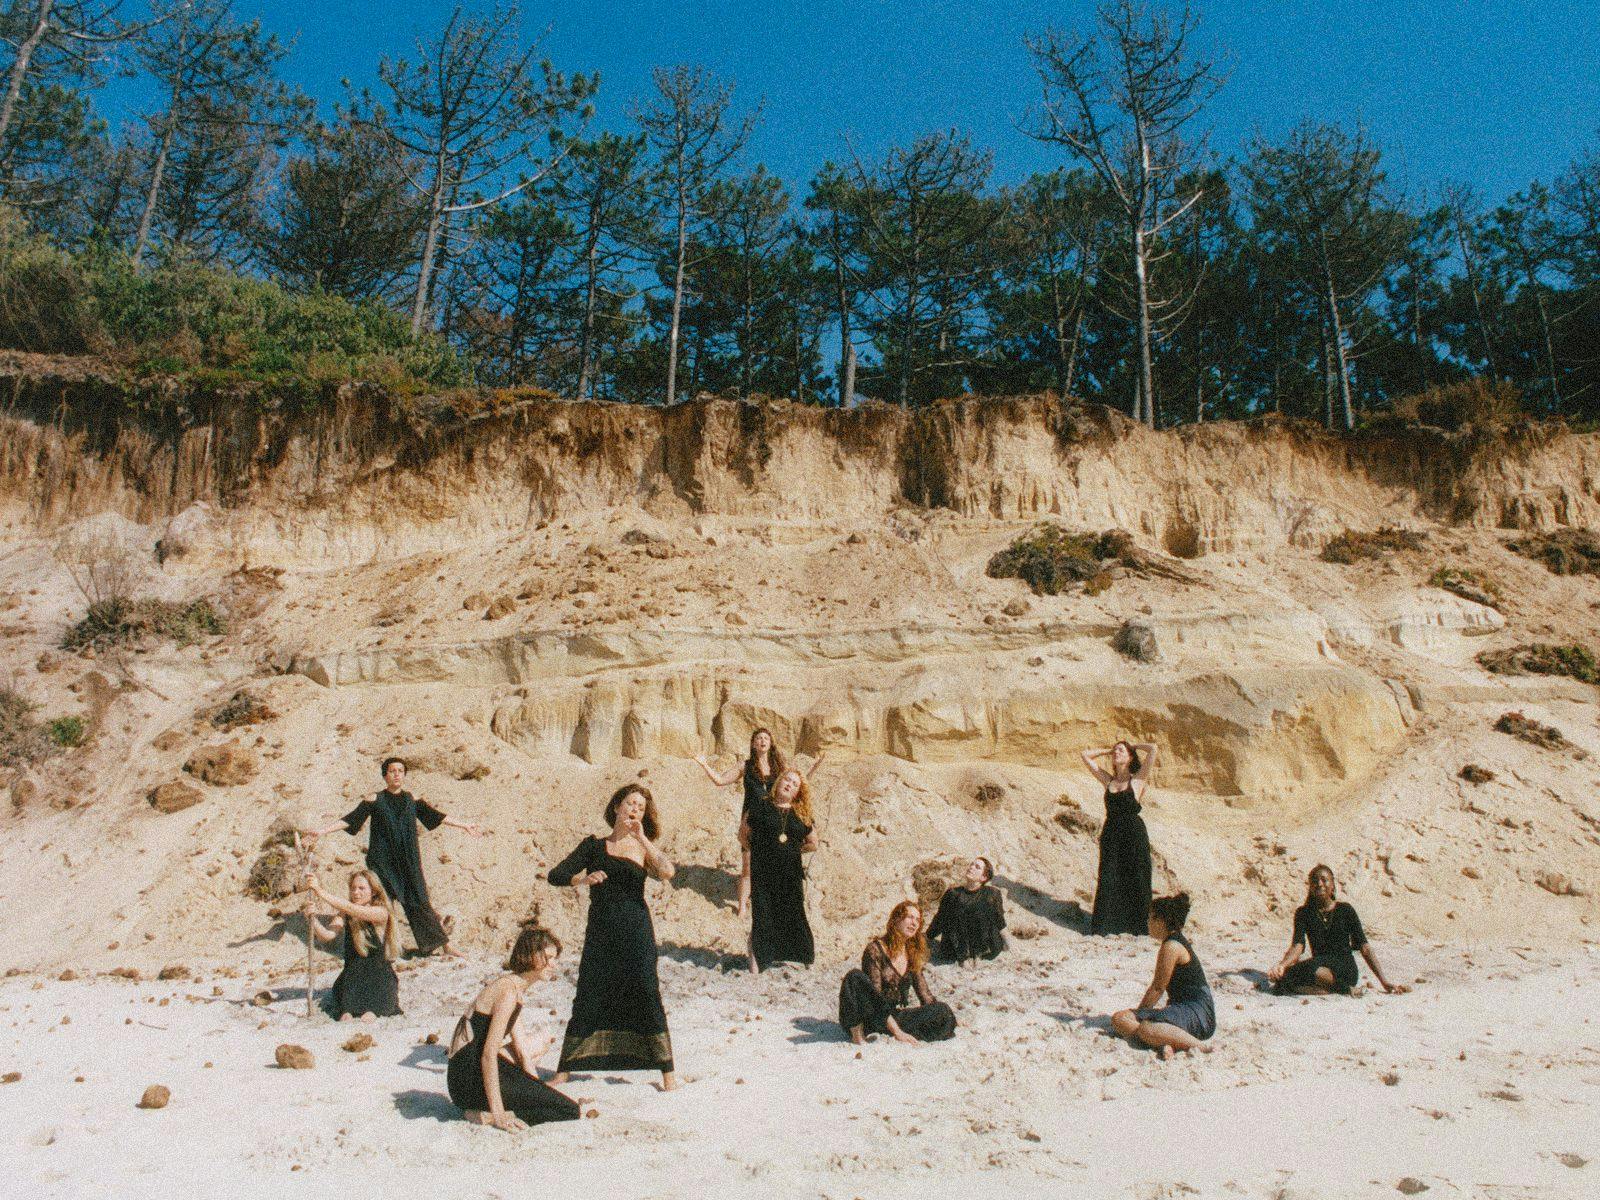 Several members of NYX pose on a beach, a large tree-topped crumbling sand dune backgrounds them.